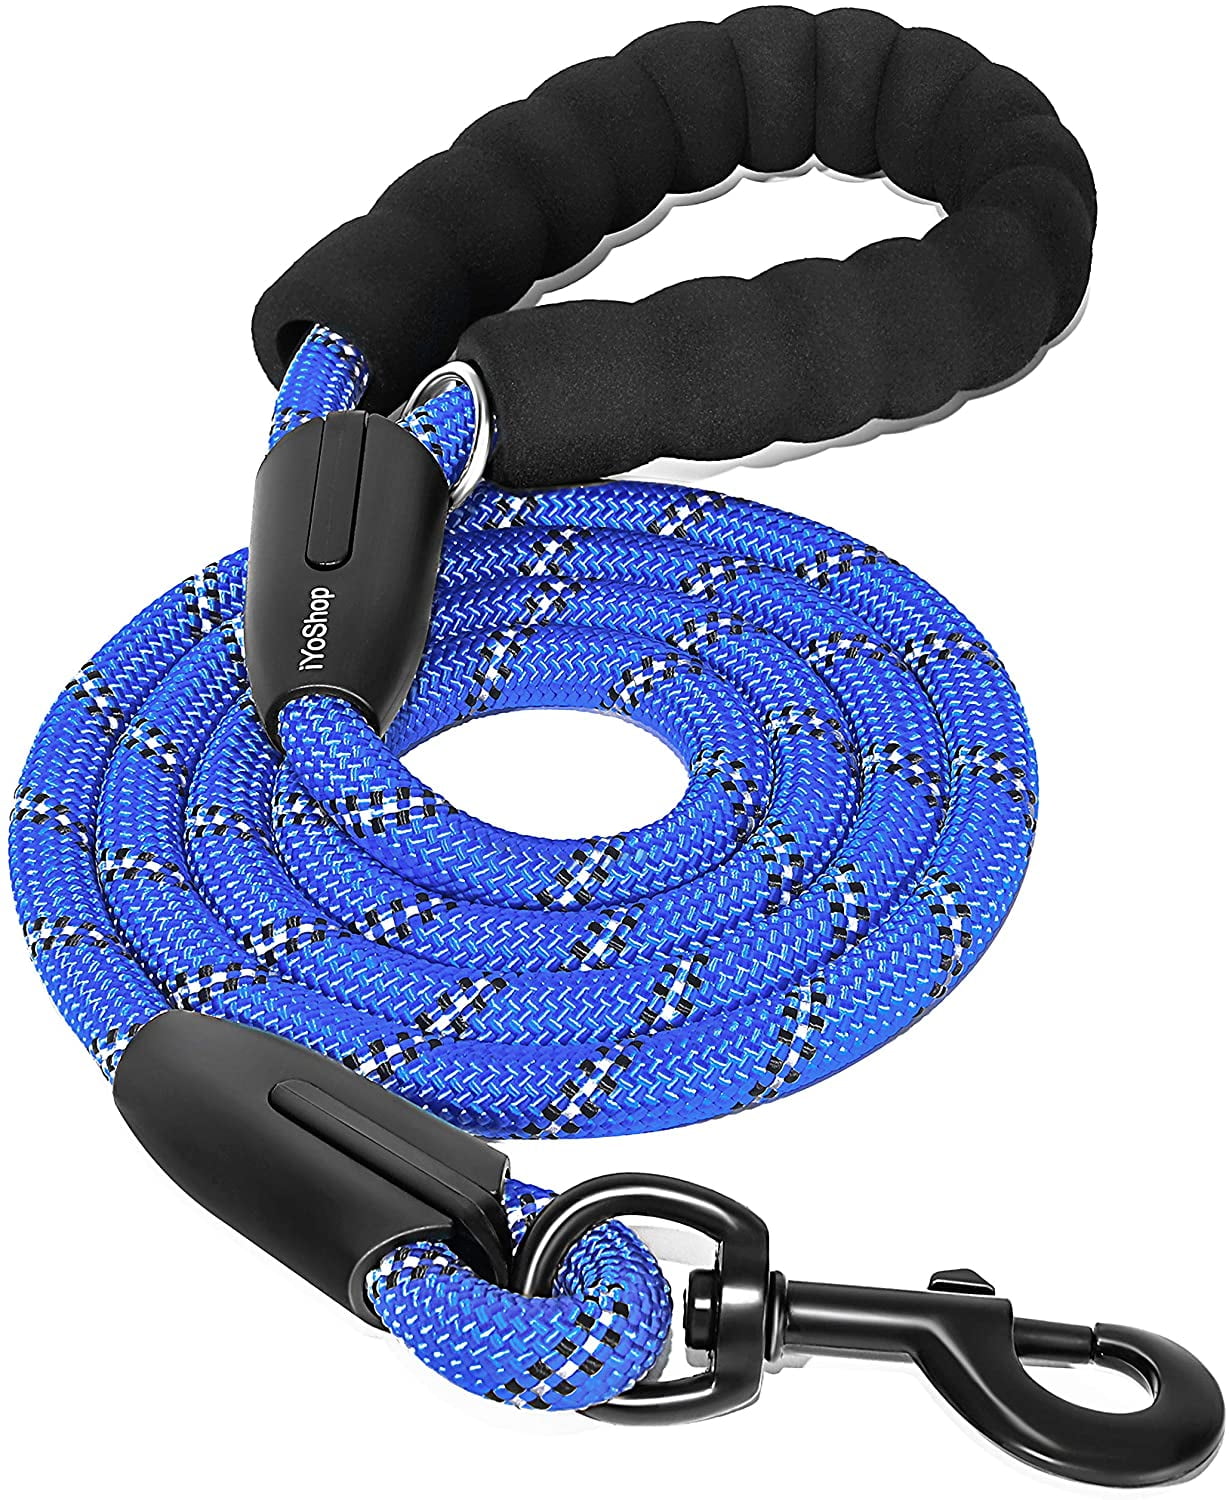 1/2 inch Diameter VLDCO 10 FT Strong Dog Leash Extra Heavy Duty Rock Climbing Rope Comfortable Padded Handle Highly Reflective Threads for Small Medium Large Dogs 